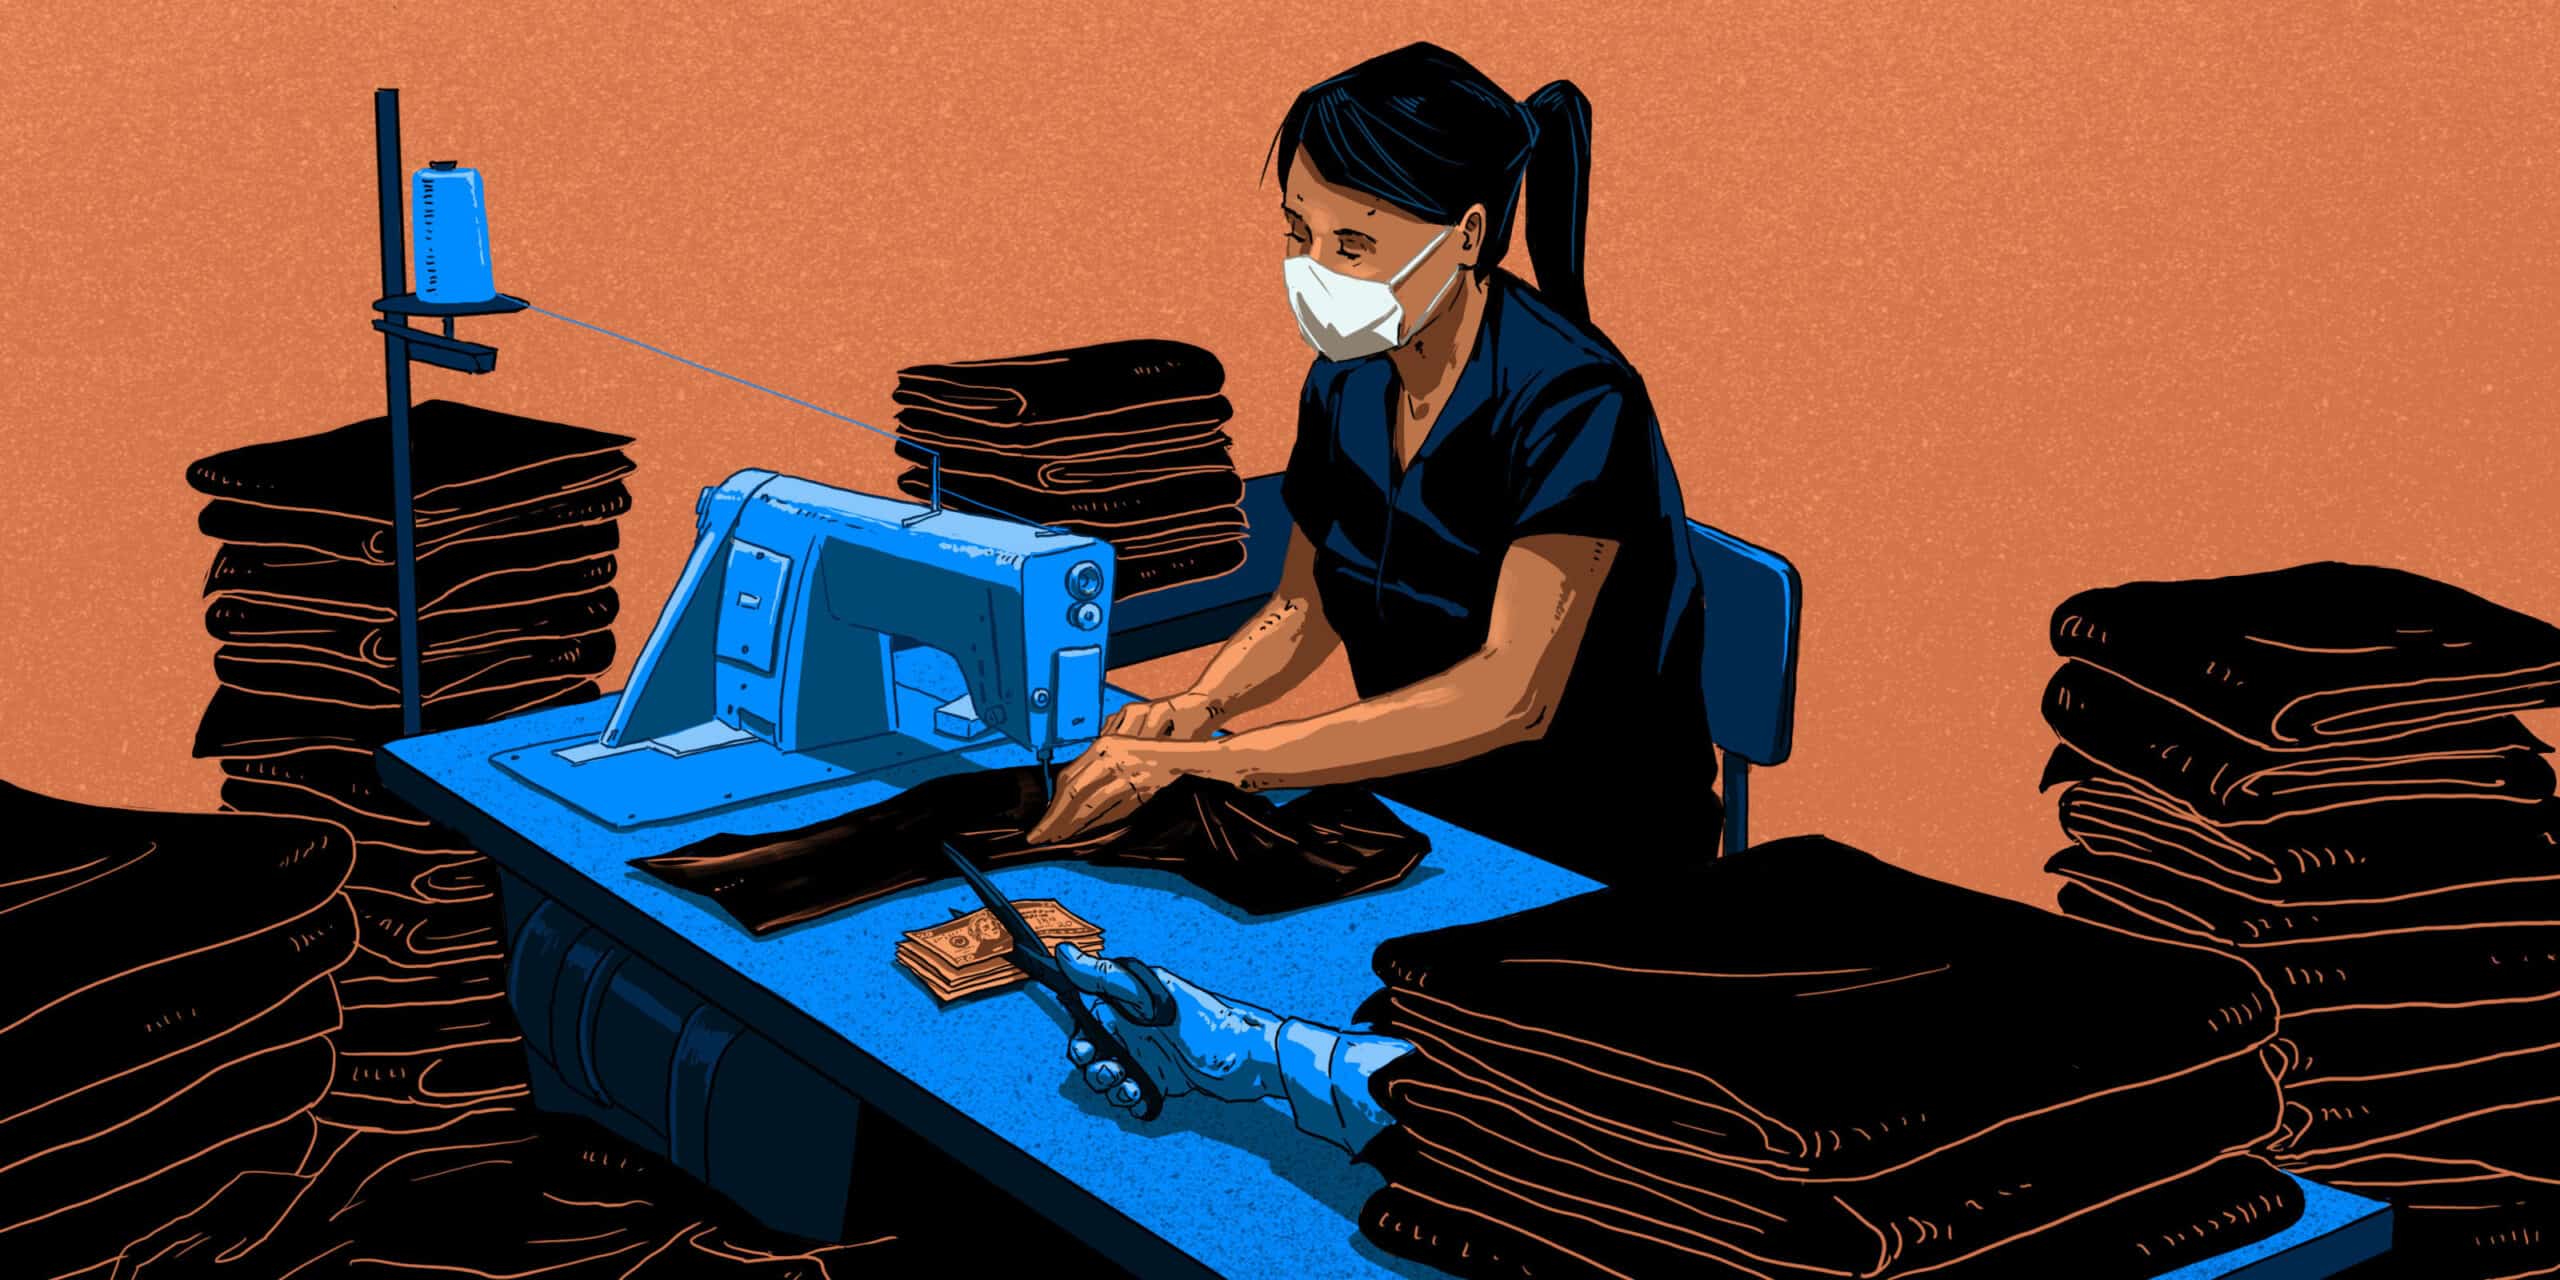 An illustration of a garment worker sitting at a sewing machine as she sews. There is a hand that appears with scissors that cuts money that is laying down on the table the worker is sewing on.